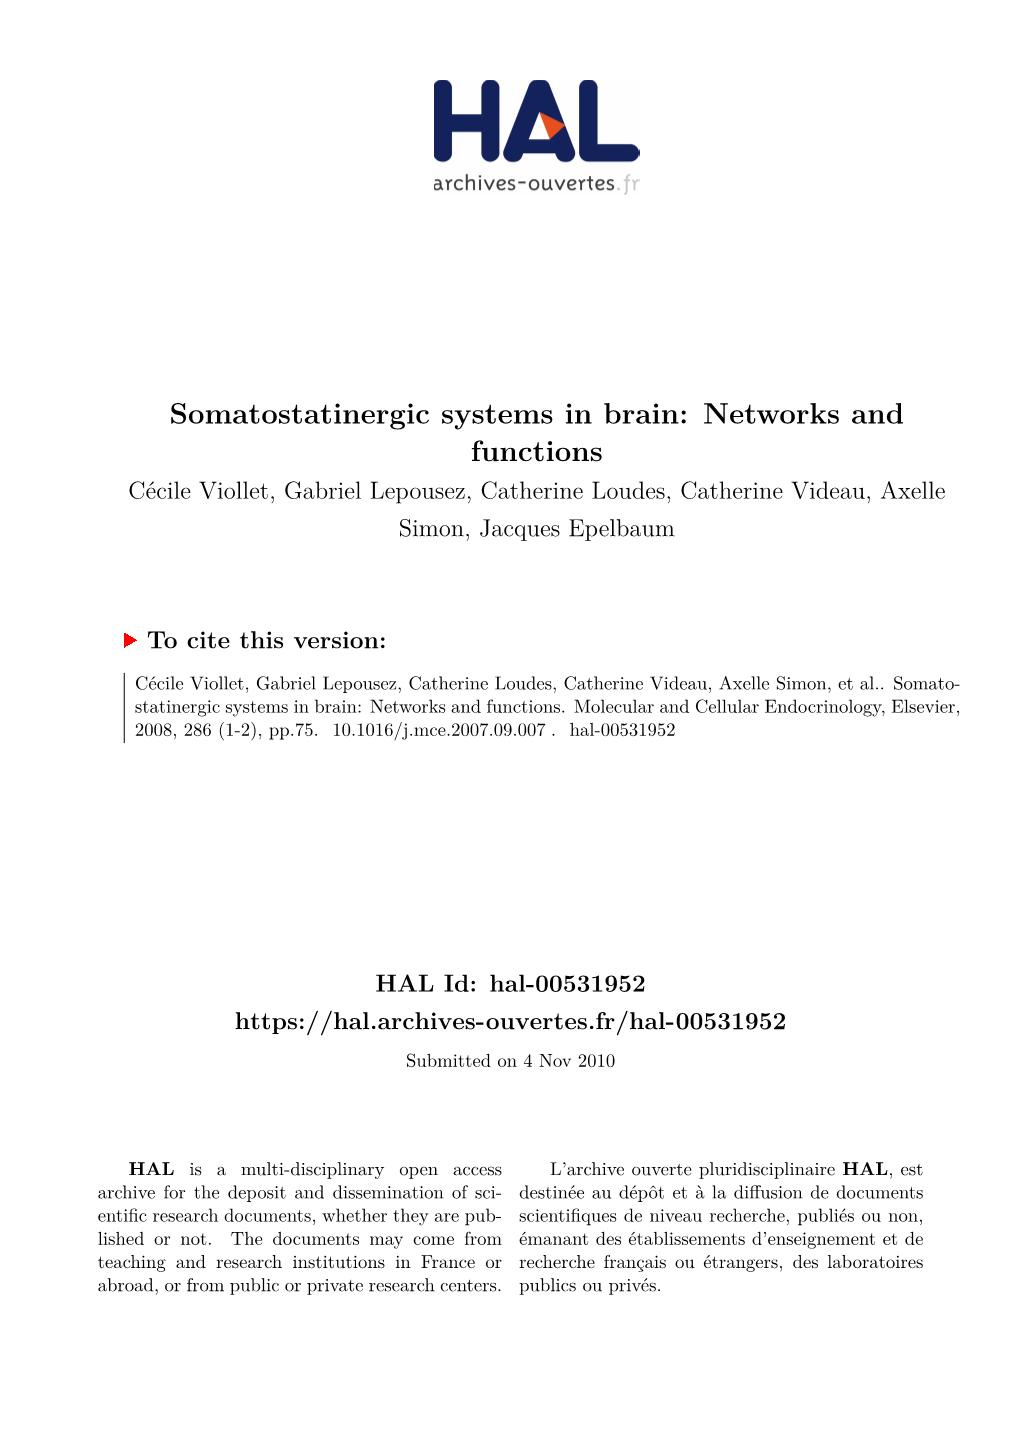 Somatostatinergic Systems in Brain: Networks and Functions Cécile Viollet, Gabriel Lepousez, Catherine Loudes, Catherine Videau, Axelle Simon, Jacques Epelbaum